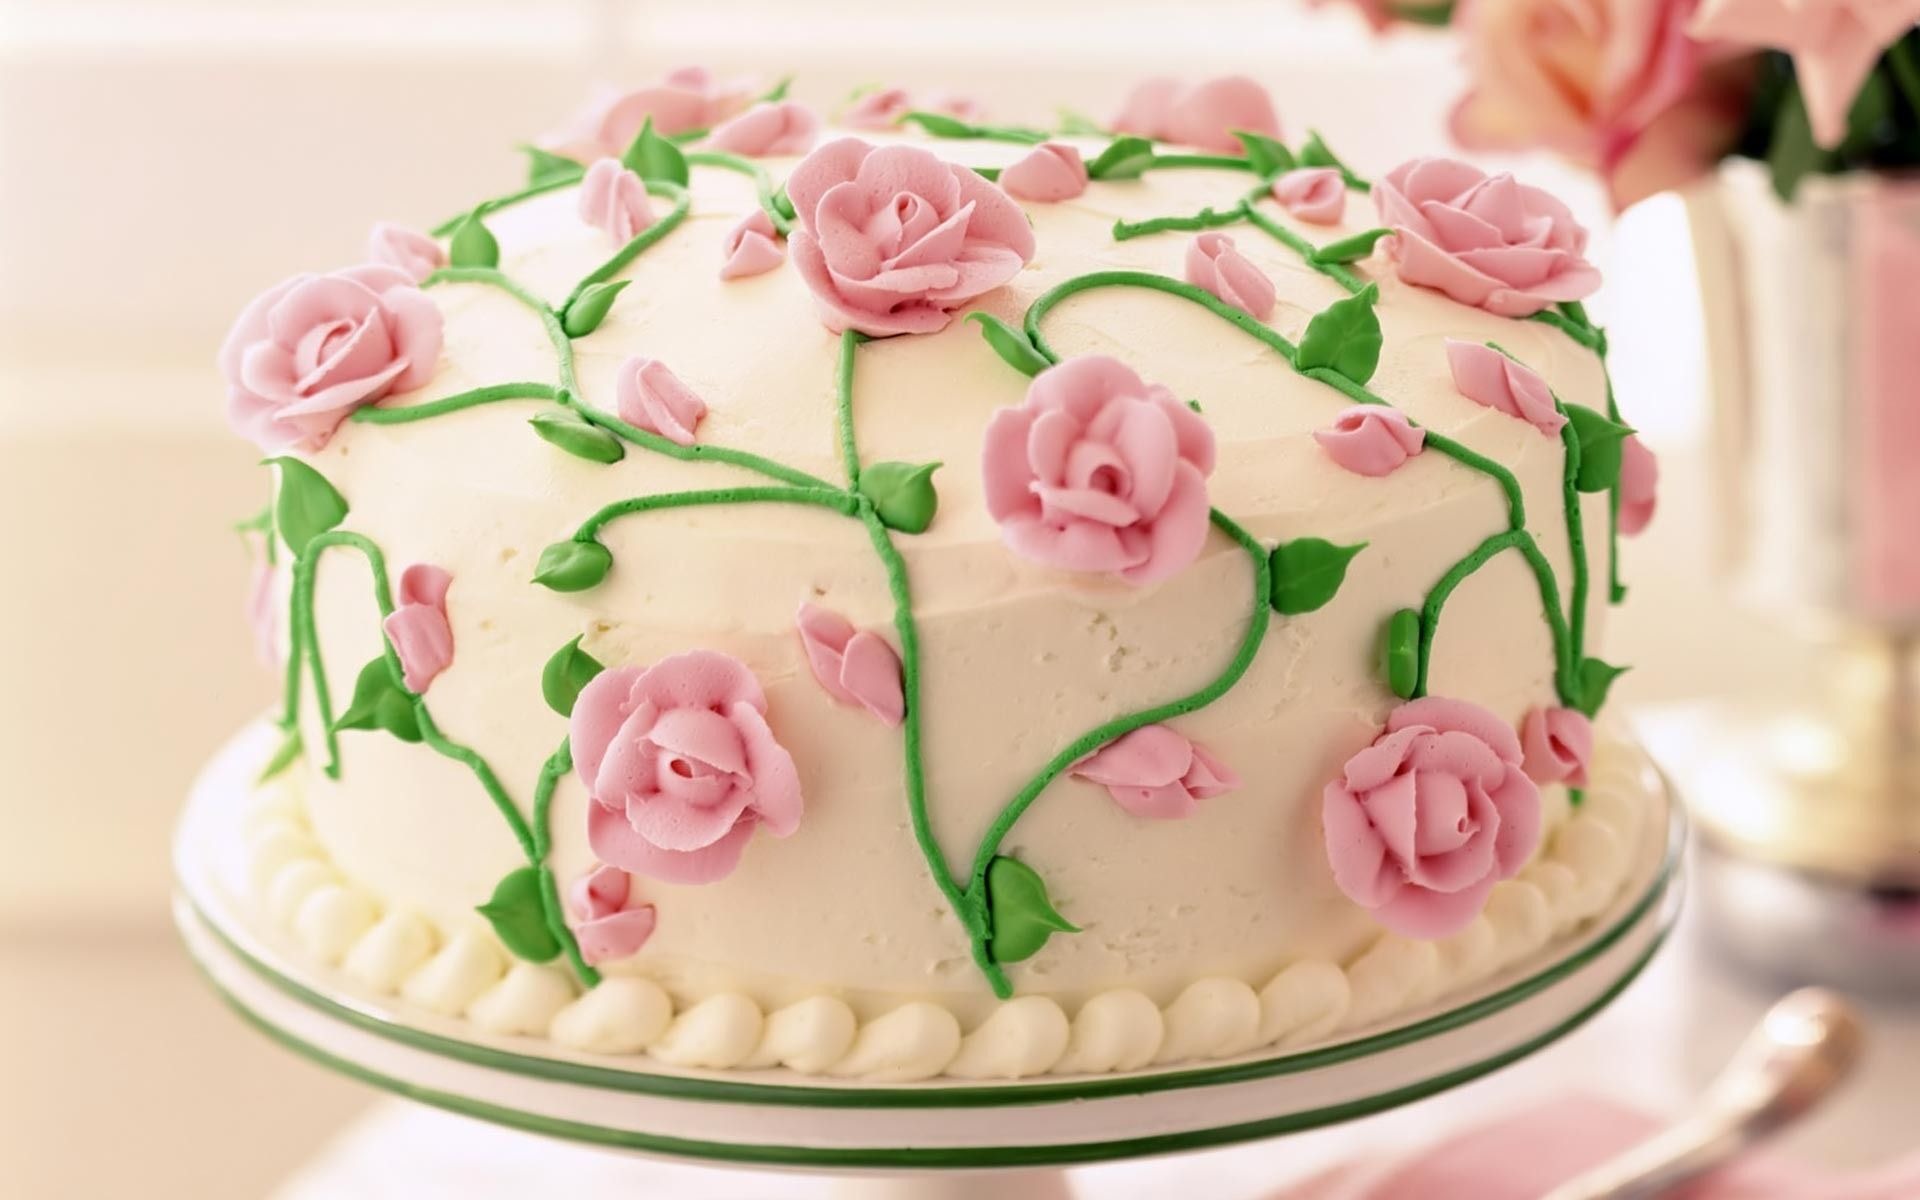 Cake Decorated With Pink Roses Wallpaper Id Ias De Bolo